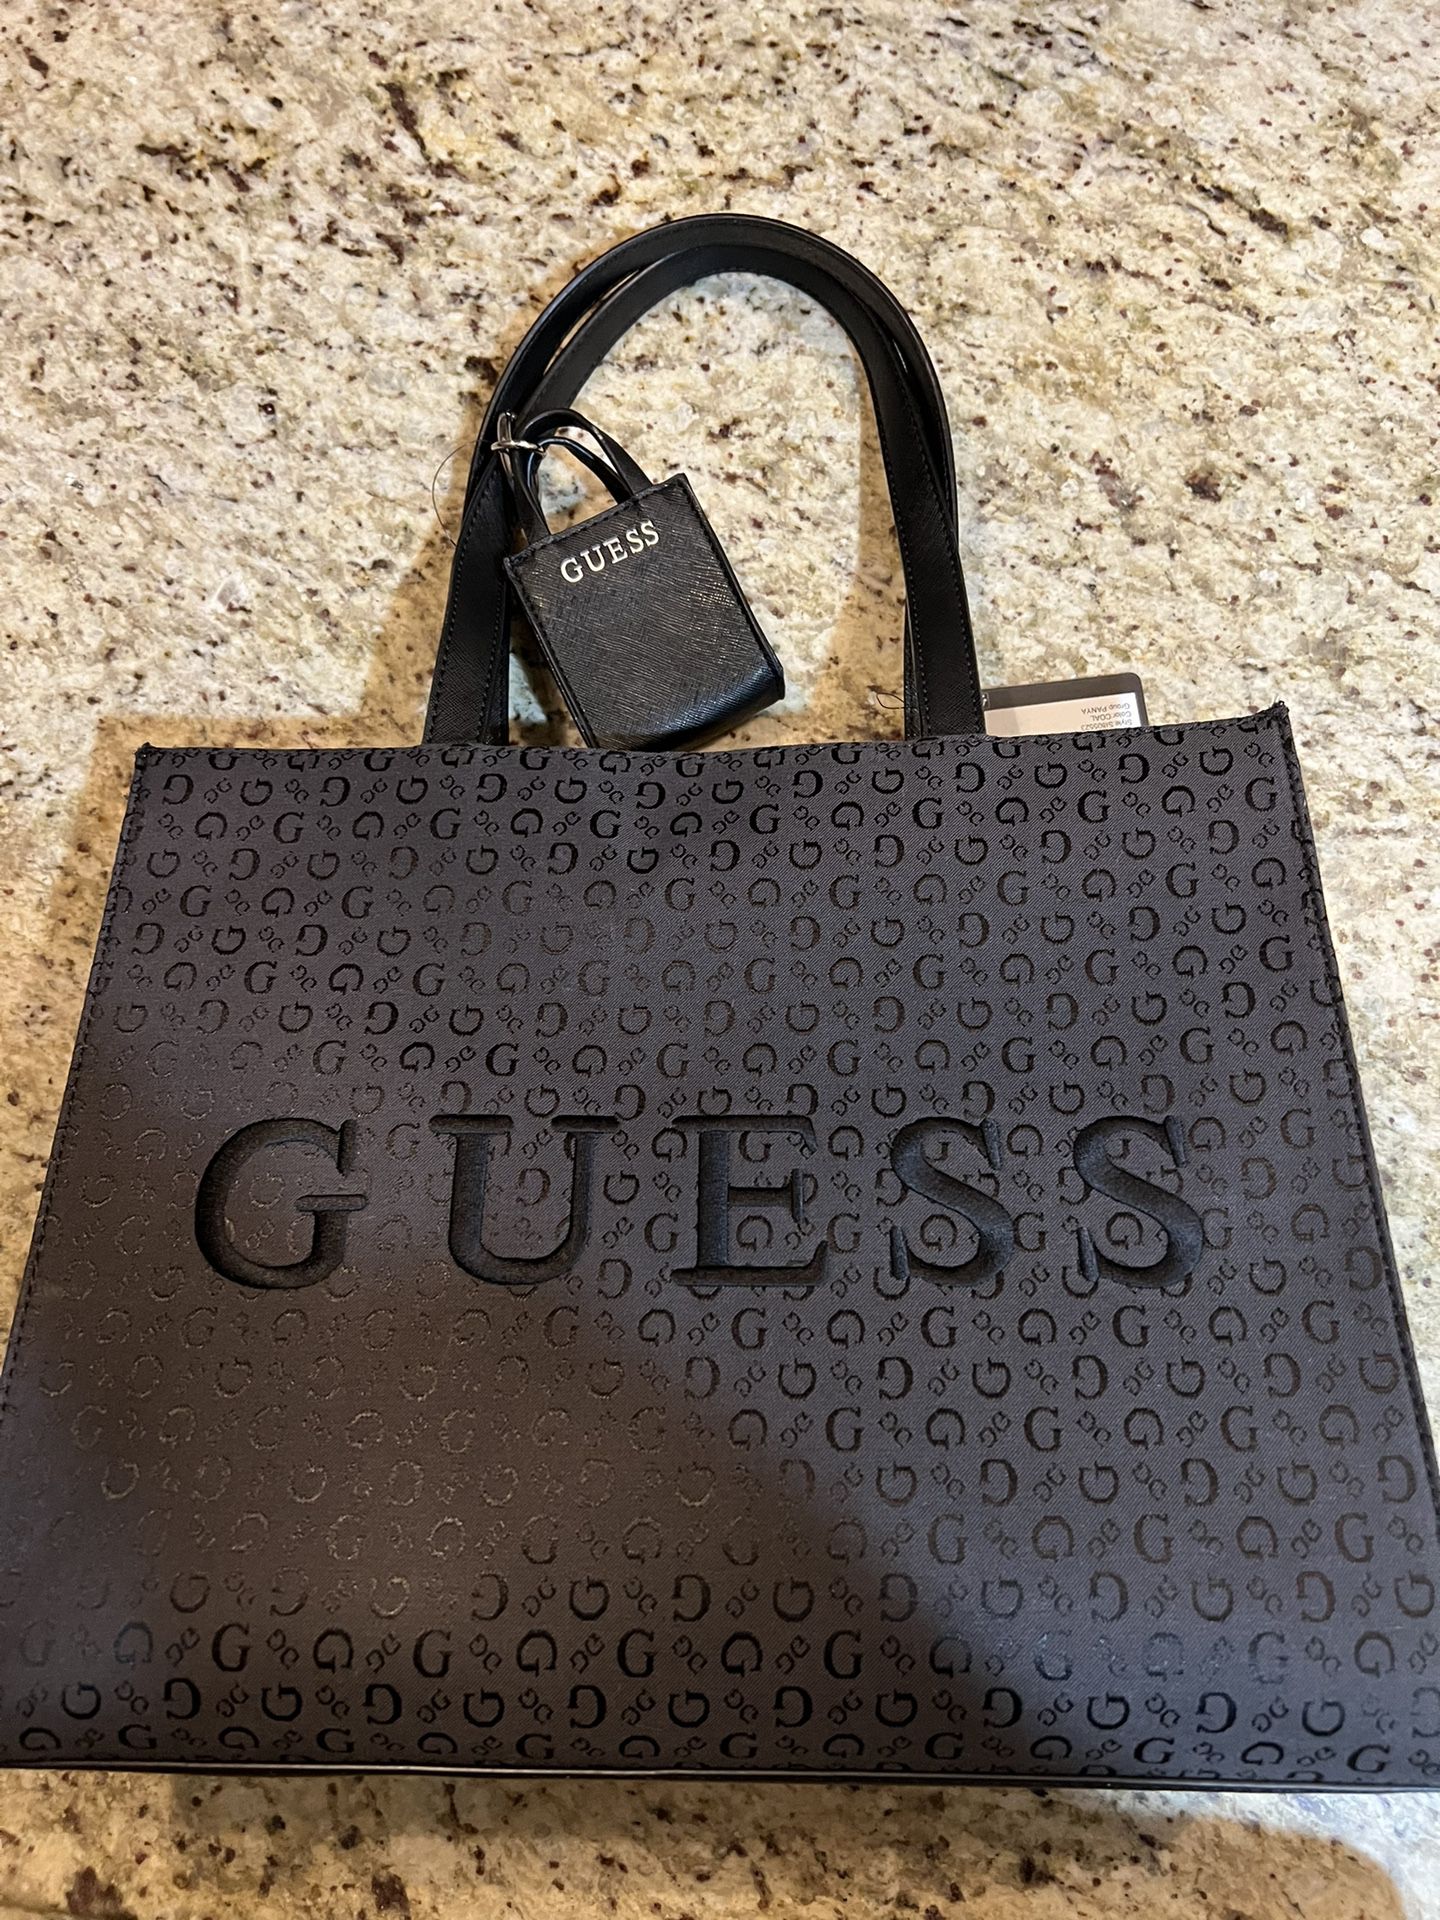 Brand New Guess Bag! for Sale in Babylon, NY - OfferUp